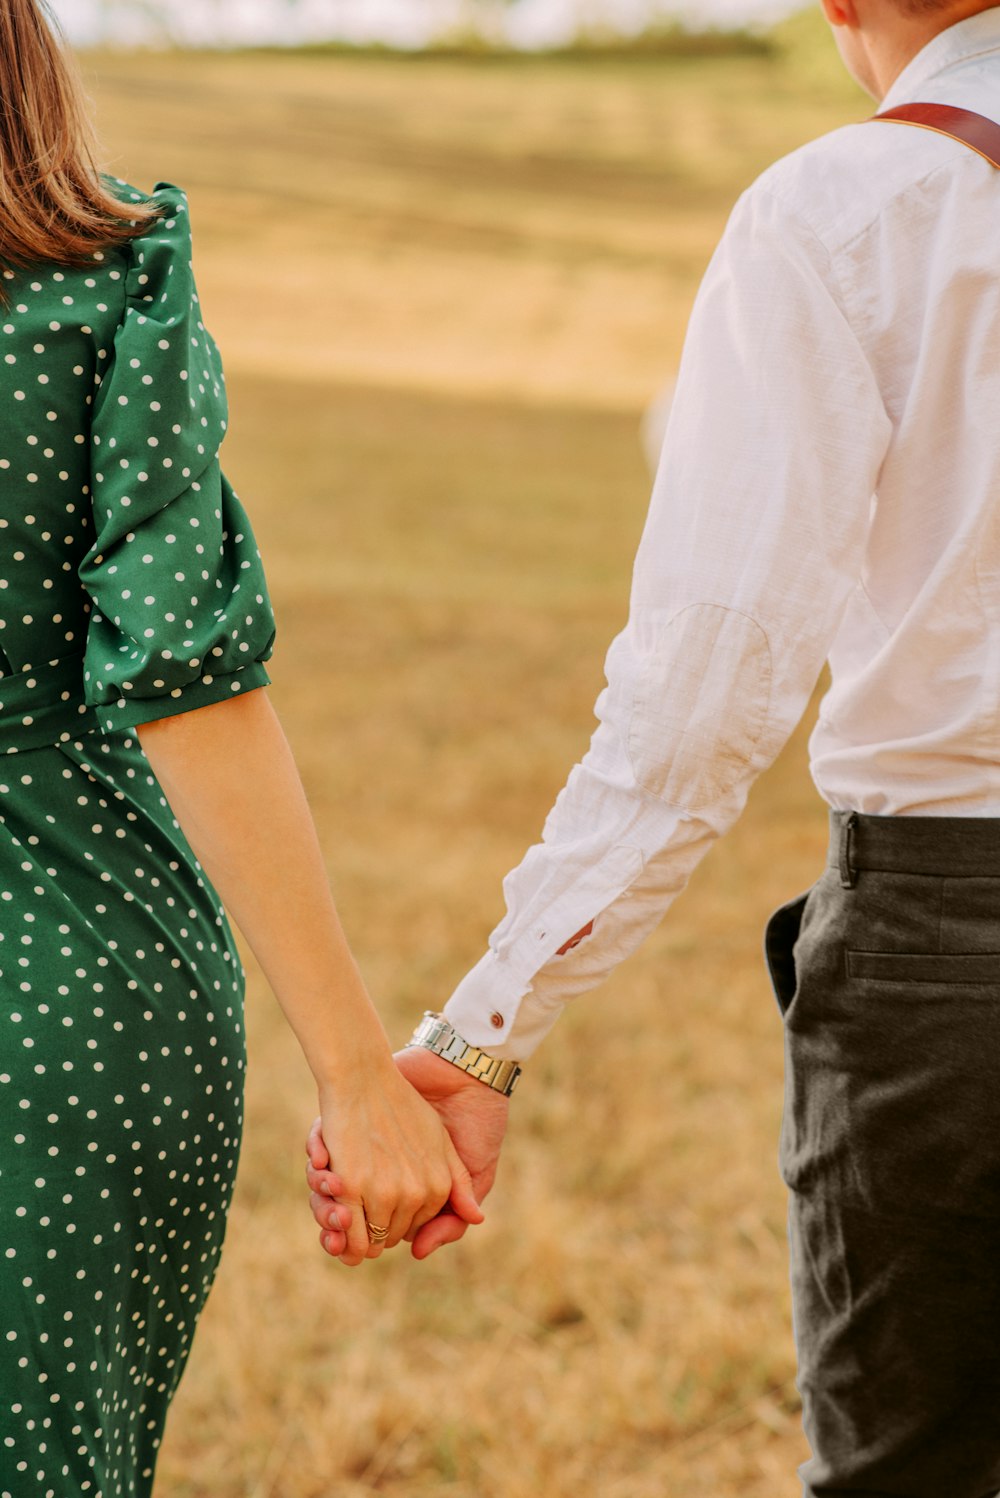 woman in green and white polka dot dress holding hands with man in white long sleeve